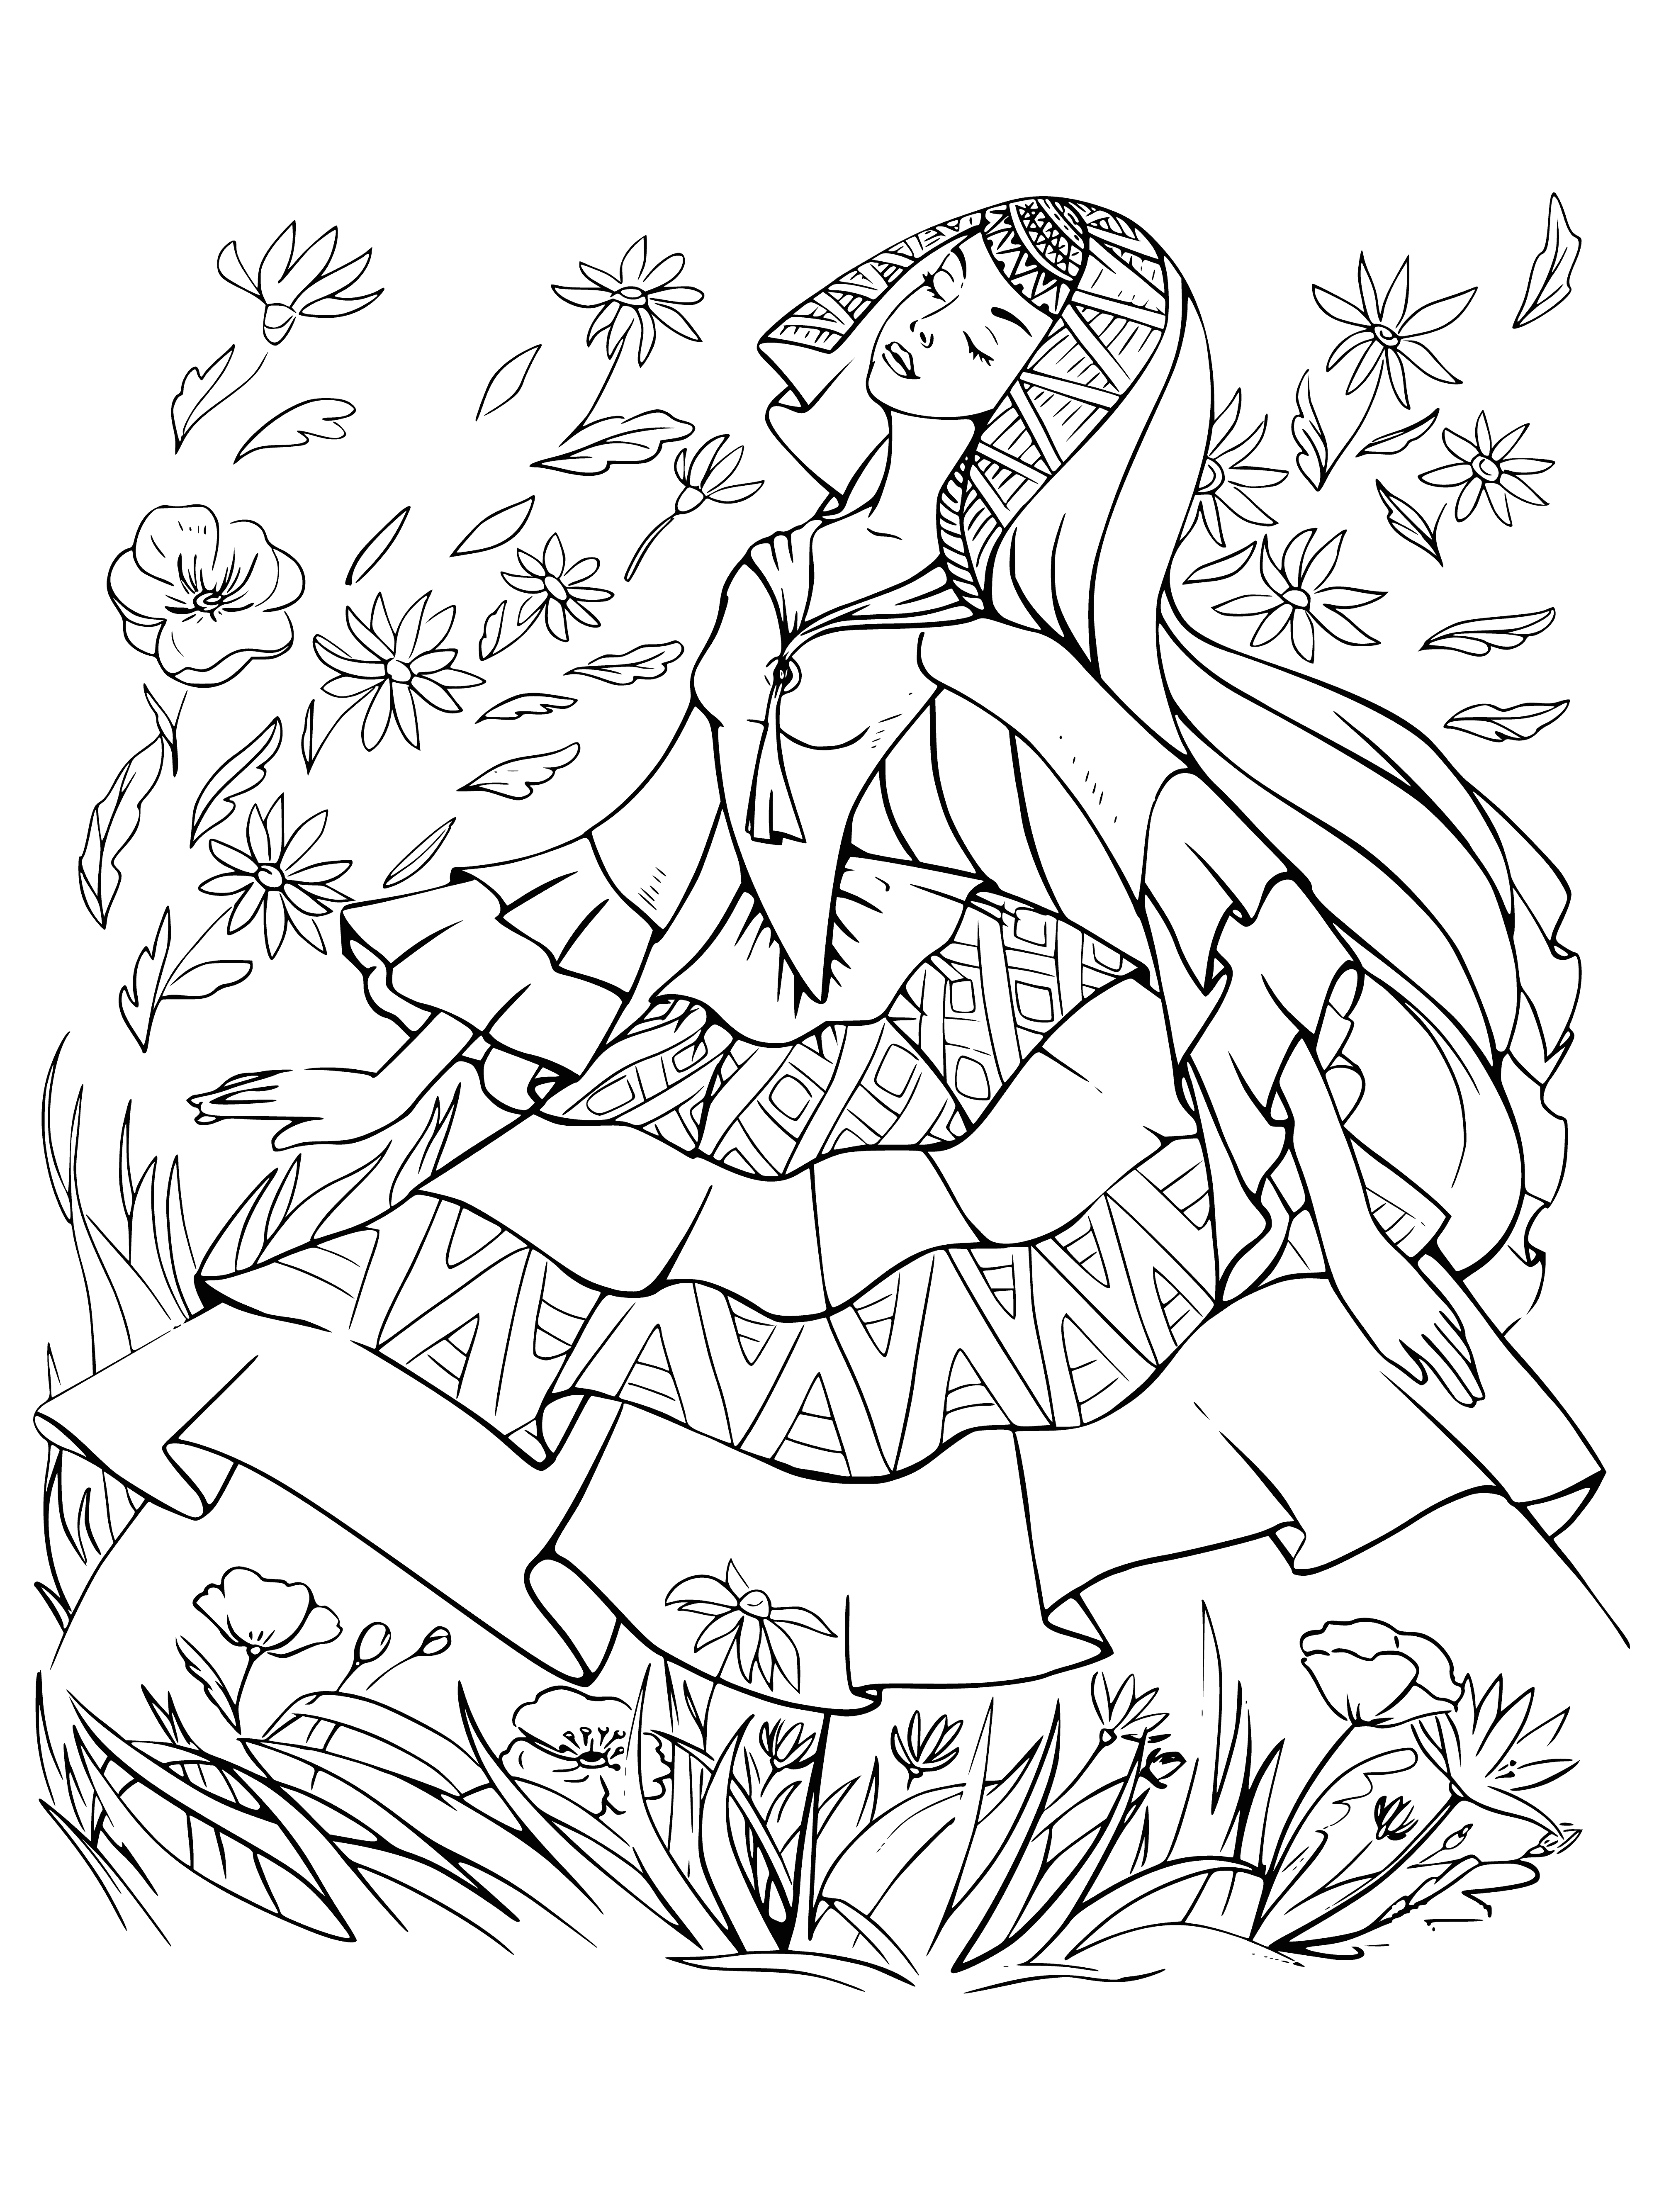 coloring page: Young woman standing in field of flowers, wearing flowing dress & crown of flowers in hair, serene expression & closed eyes.